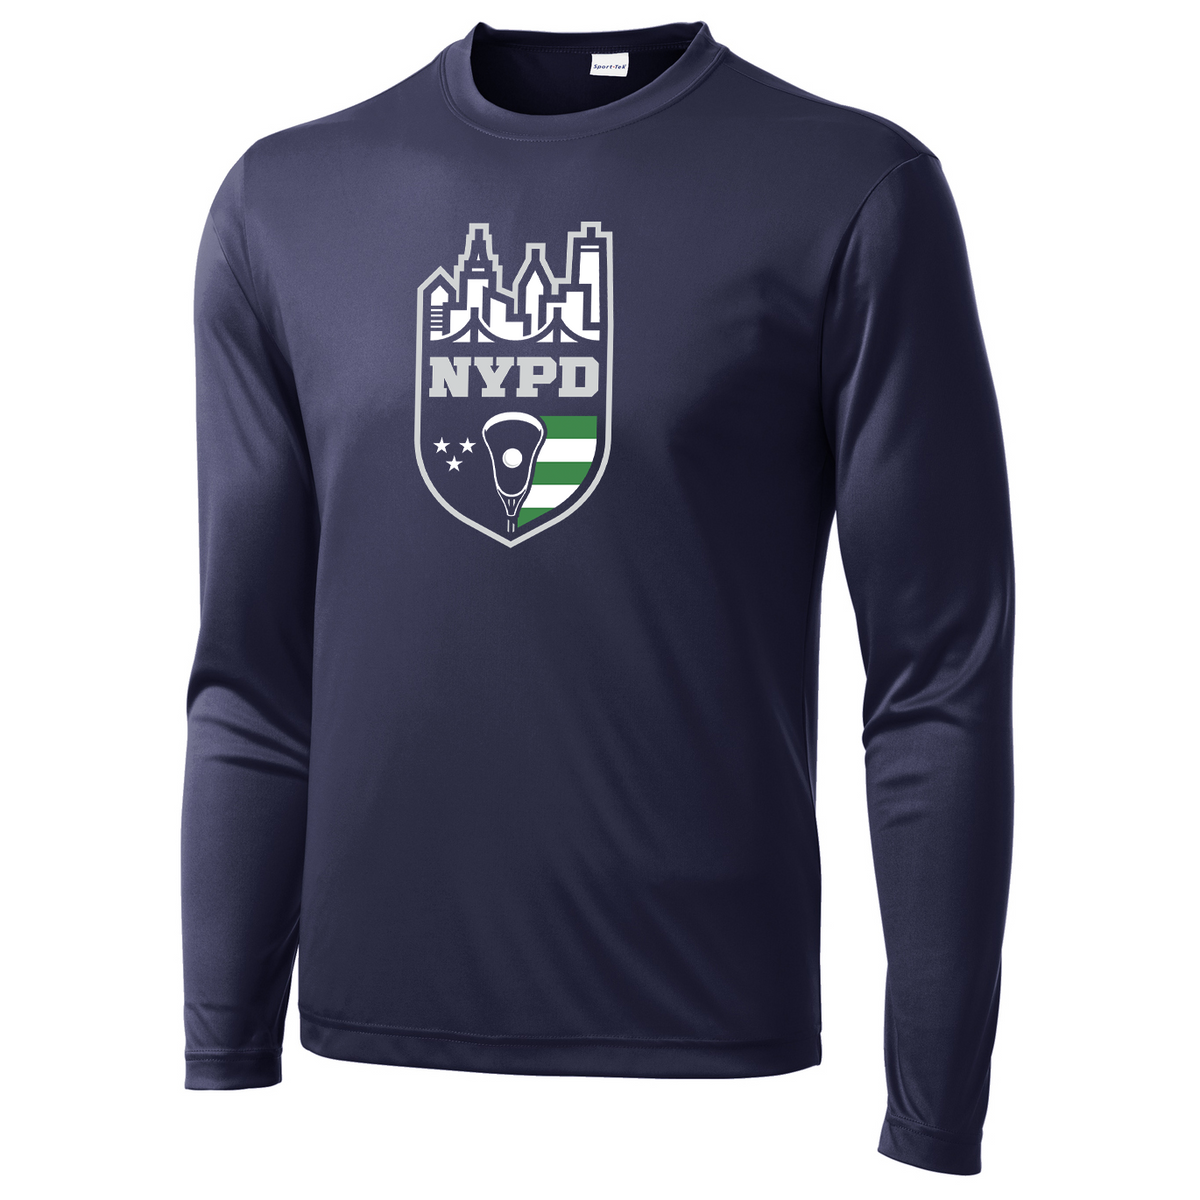 NYPD Womens Lacrosse Long Sleeve Performance Shirt